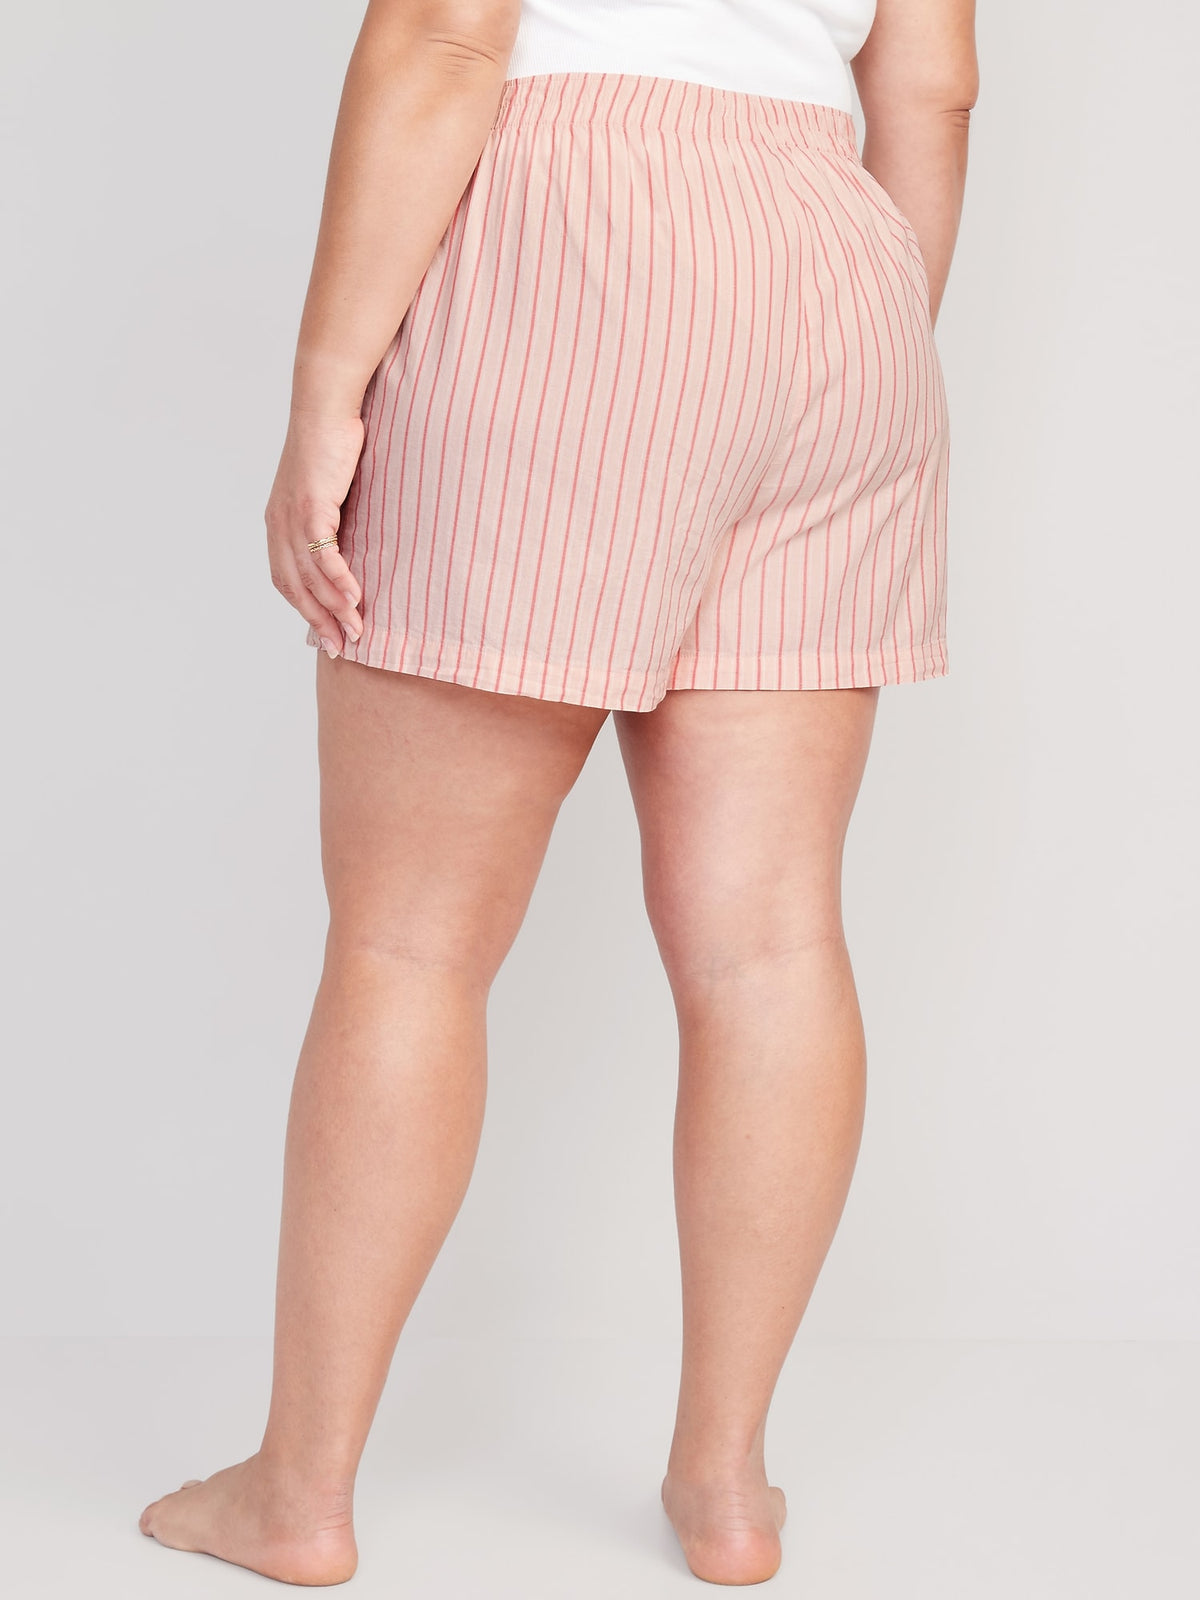 High-Waisted Striped Pajama Boxer Shorts for Women - 3.5-inch inseam